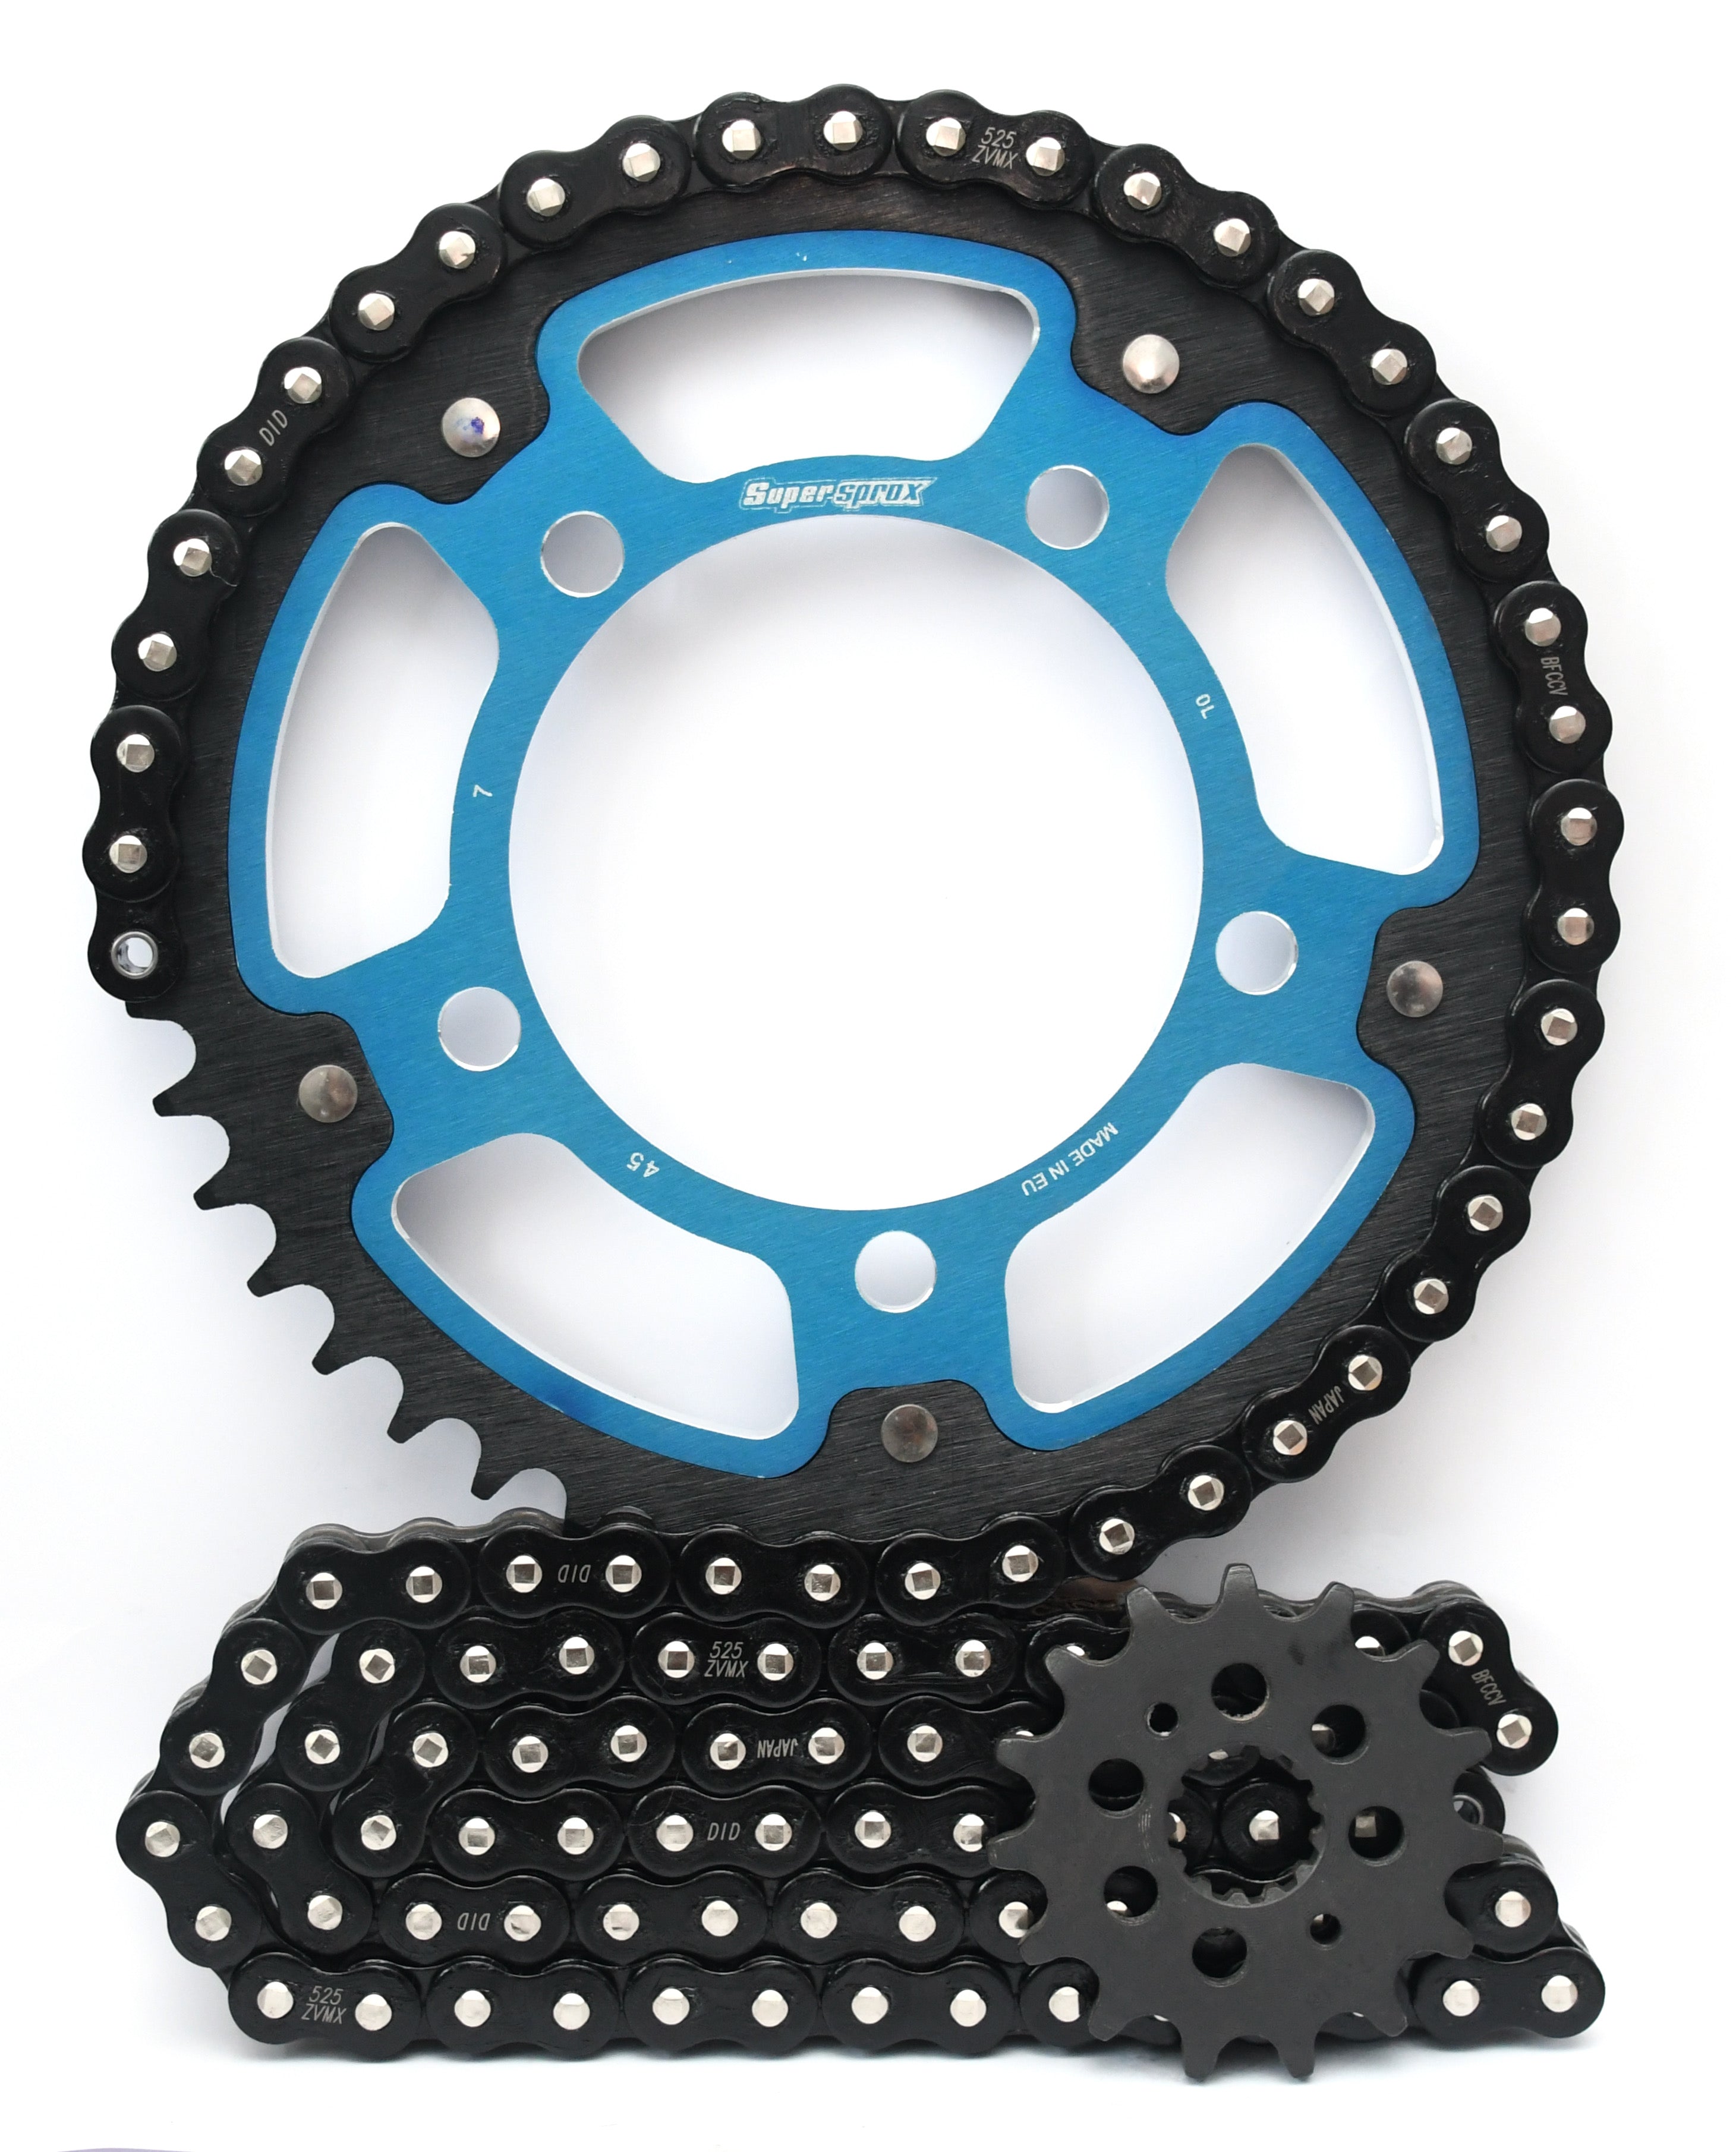 Supersprox 520 Conversion Chain and Sprocket Kit - BMW S1000RR & R 2009-2018 - Choose Your Gearing